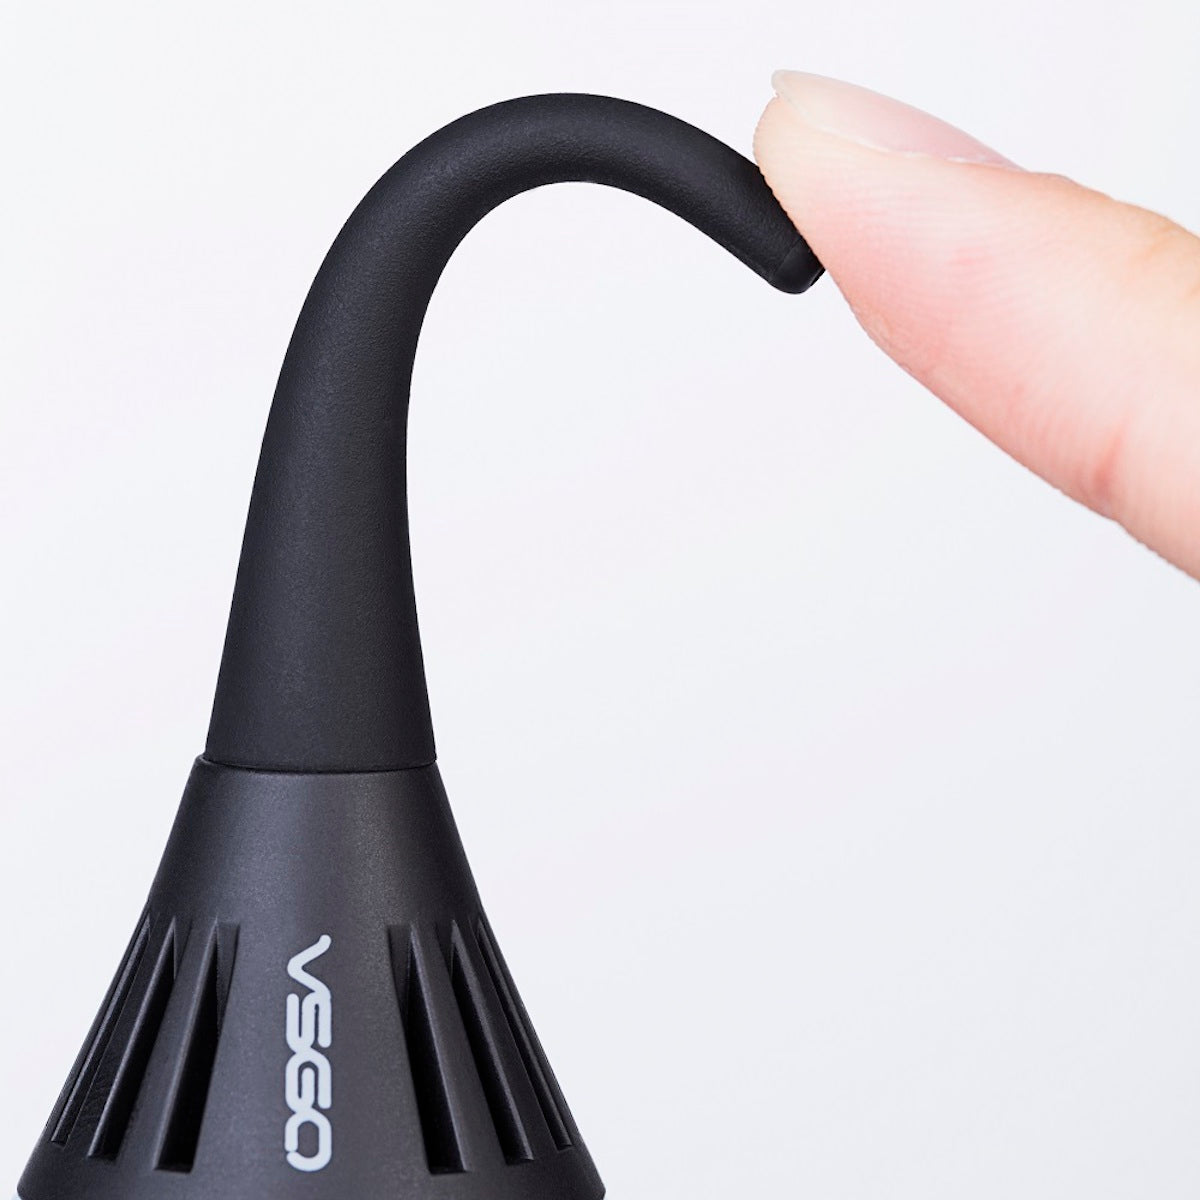 VSGO Air-Move Air Blower Soft Long Nozzle | THE COFFEE GOODS